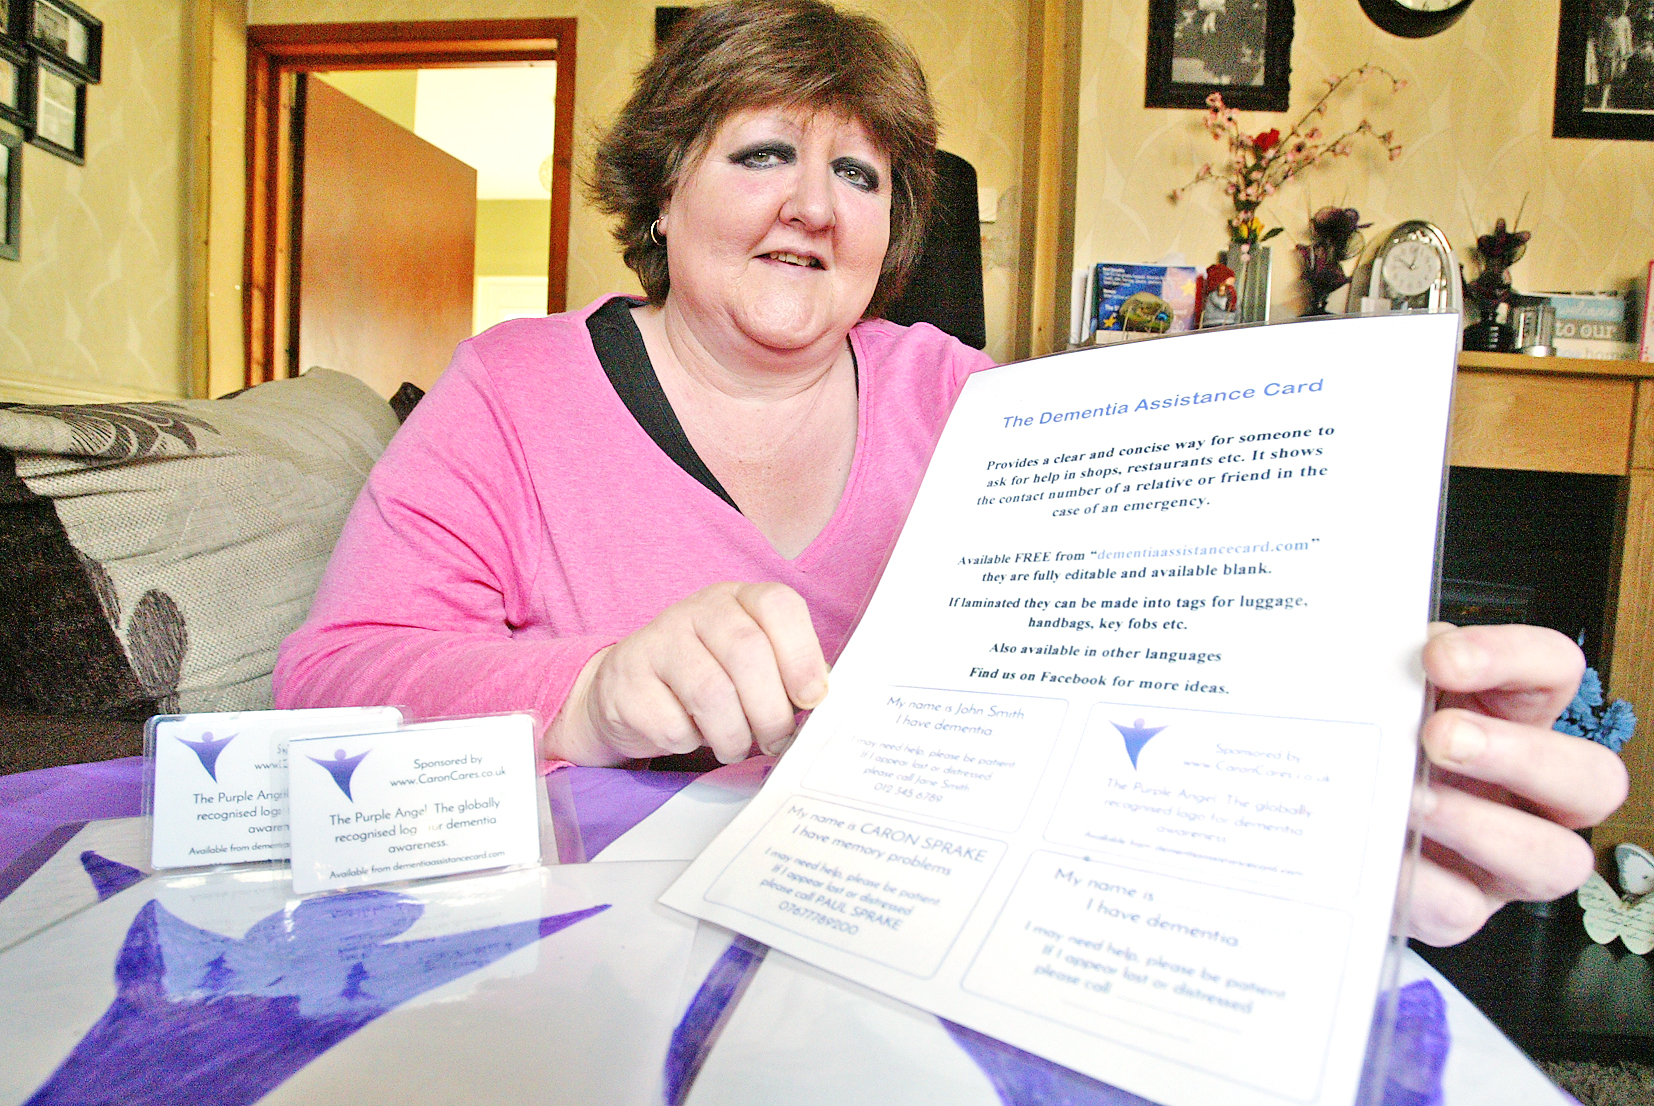 Anne Donnelly is doing her utmost to increased awareness of dementia